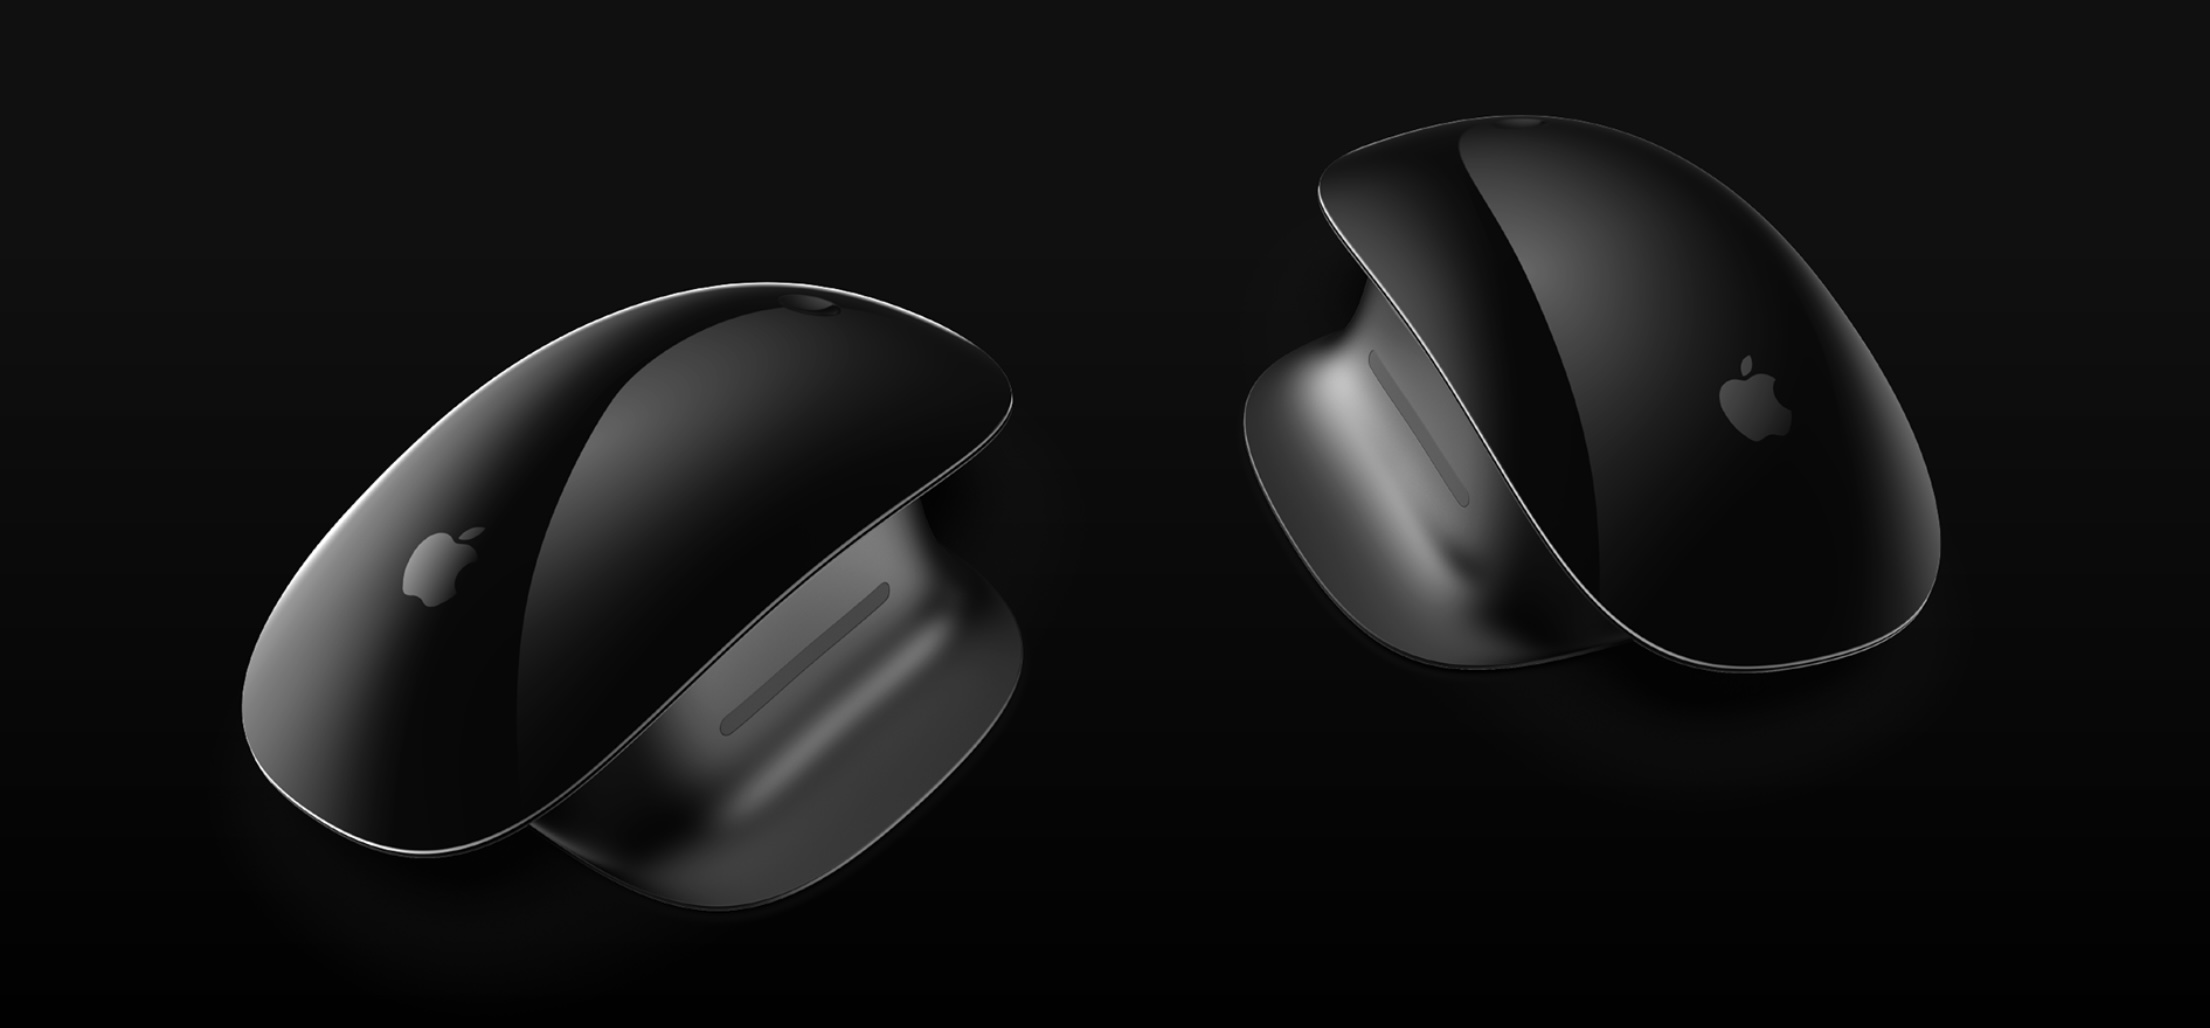 Apple Pro Mouse concept: Reversible design, Taptic Sidebar - 9to5Mac